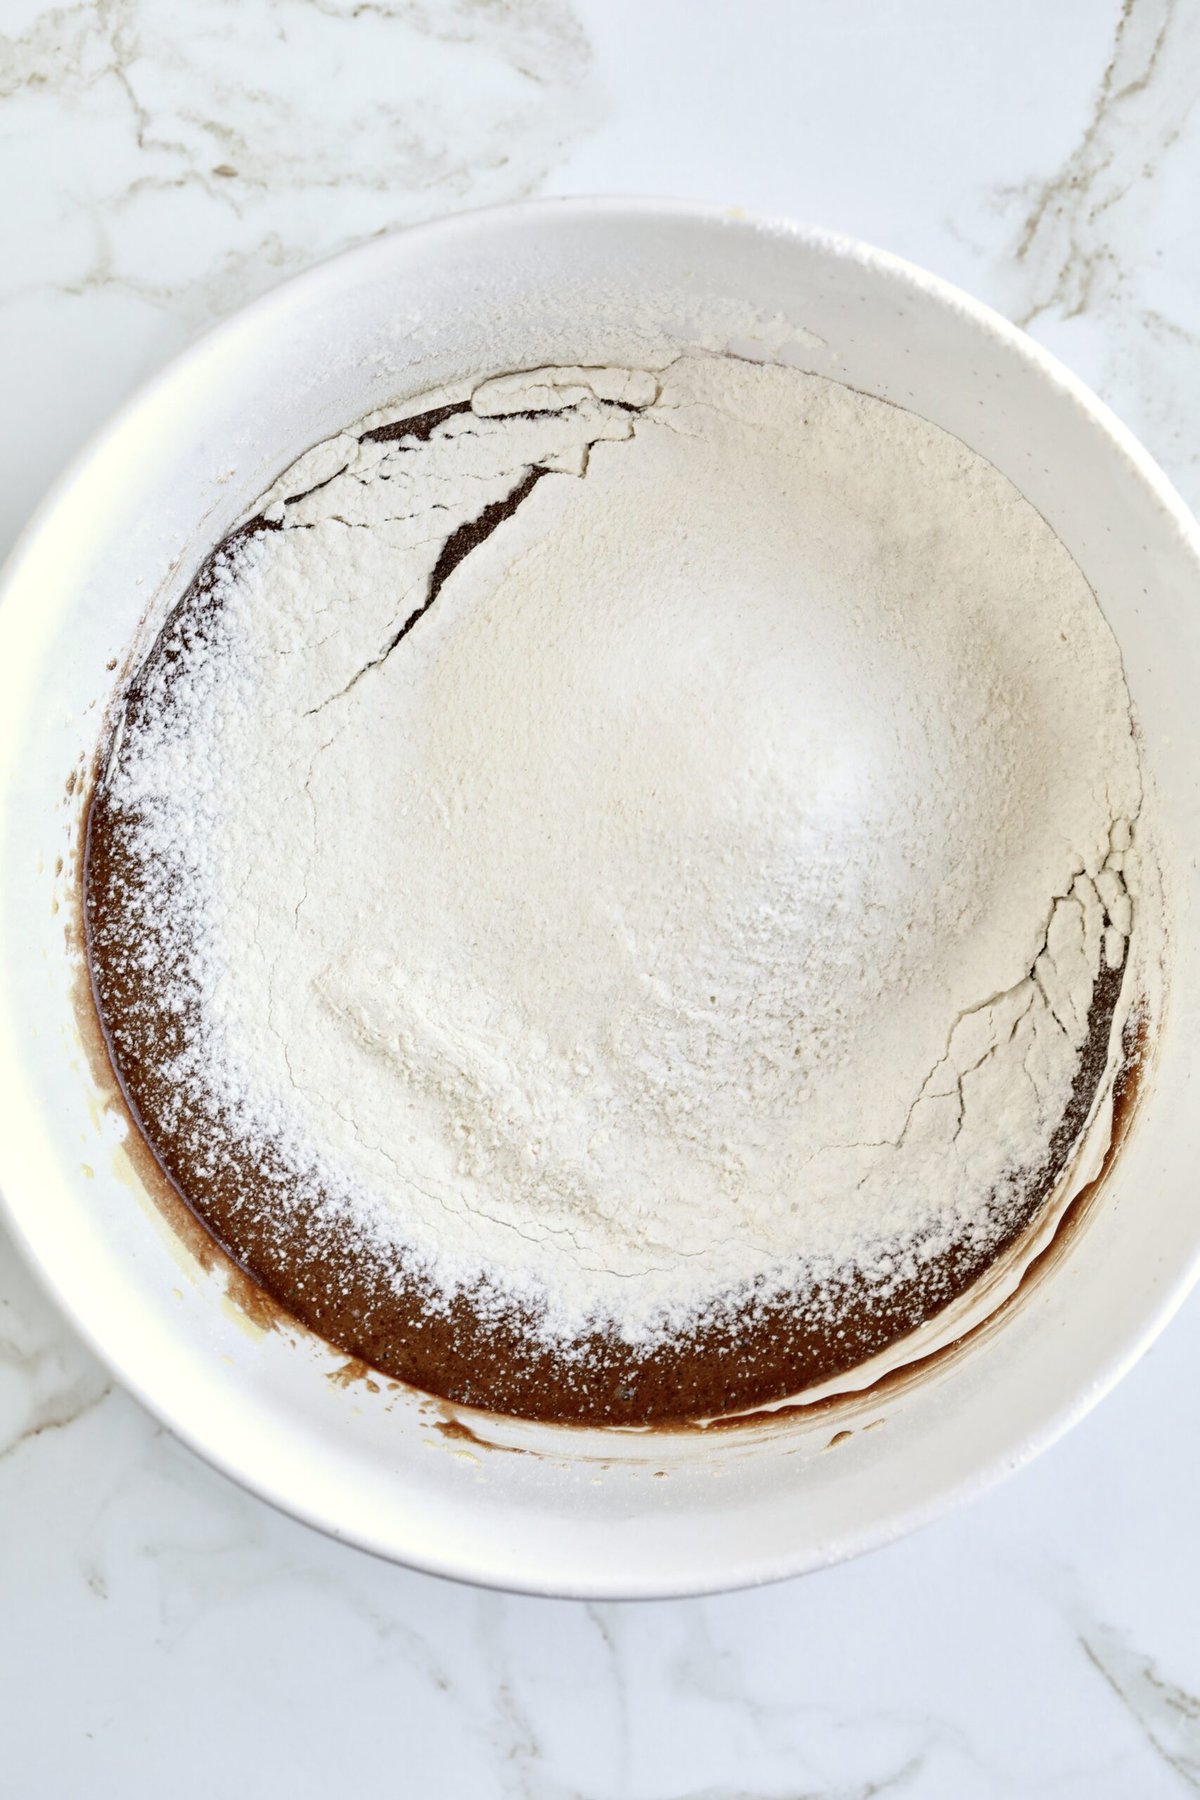 How to make chocolate olive oil cake step-by-step photos- sifting in the dry ingredients.